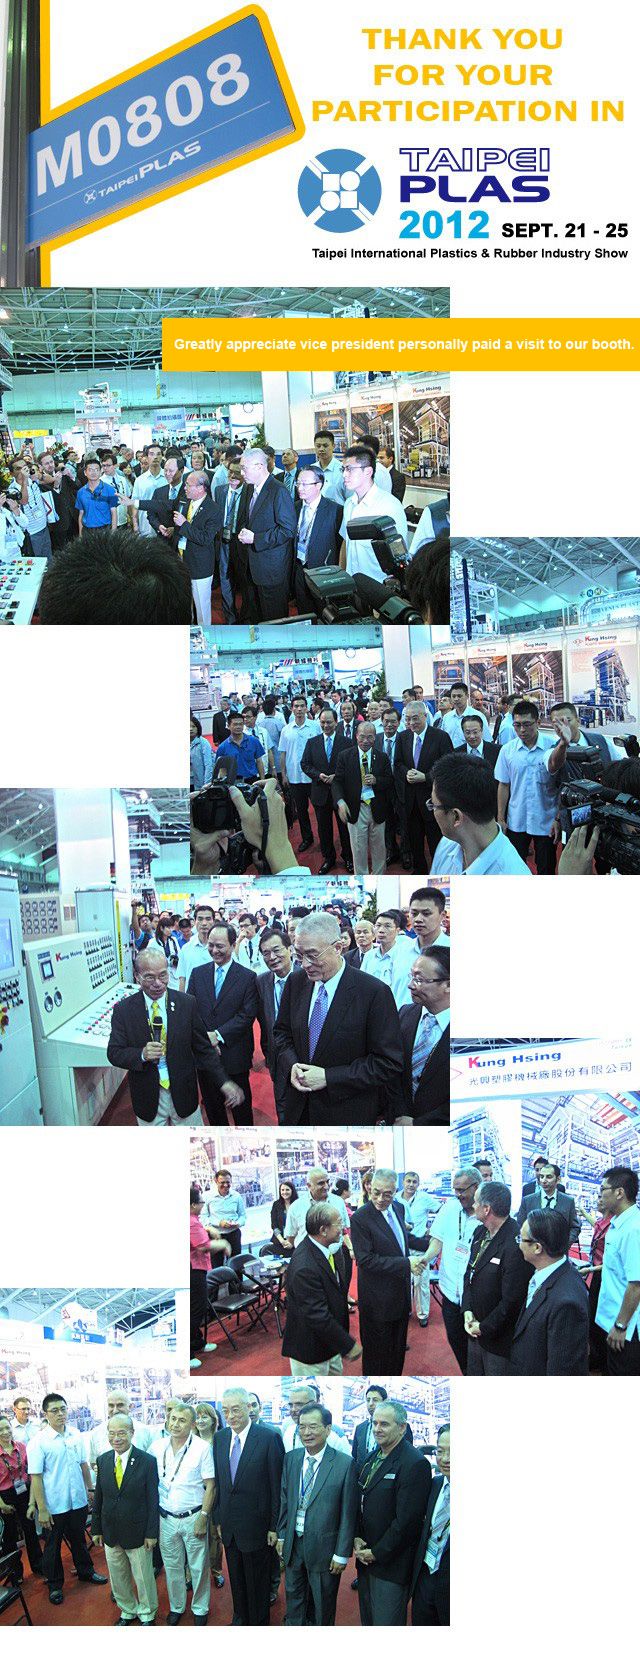 Greatly appreciate vice president Vincent C. Siew personally paid a visit to our booth.